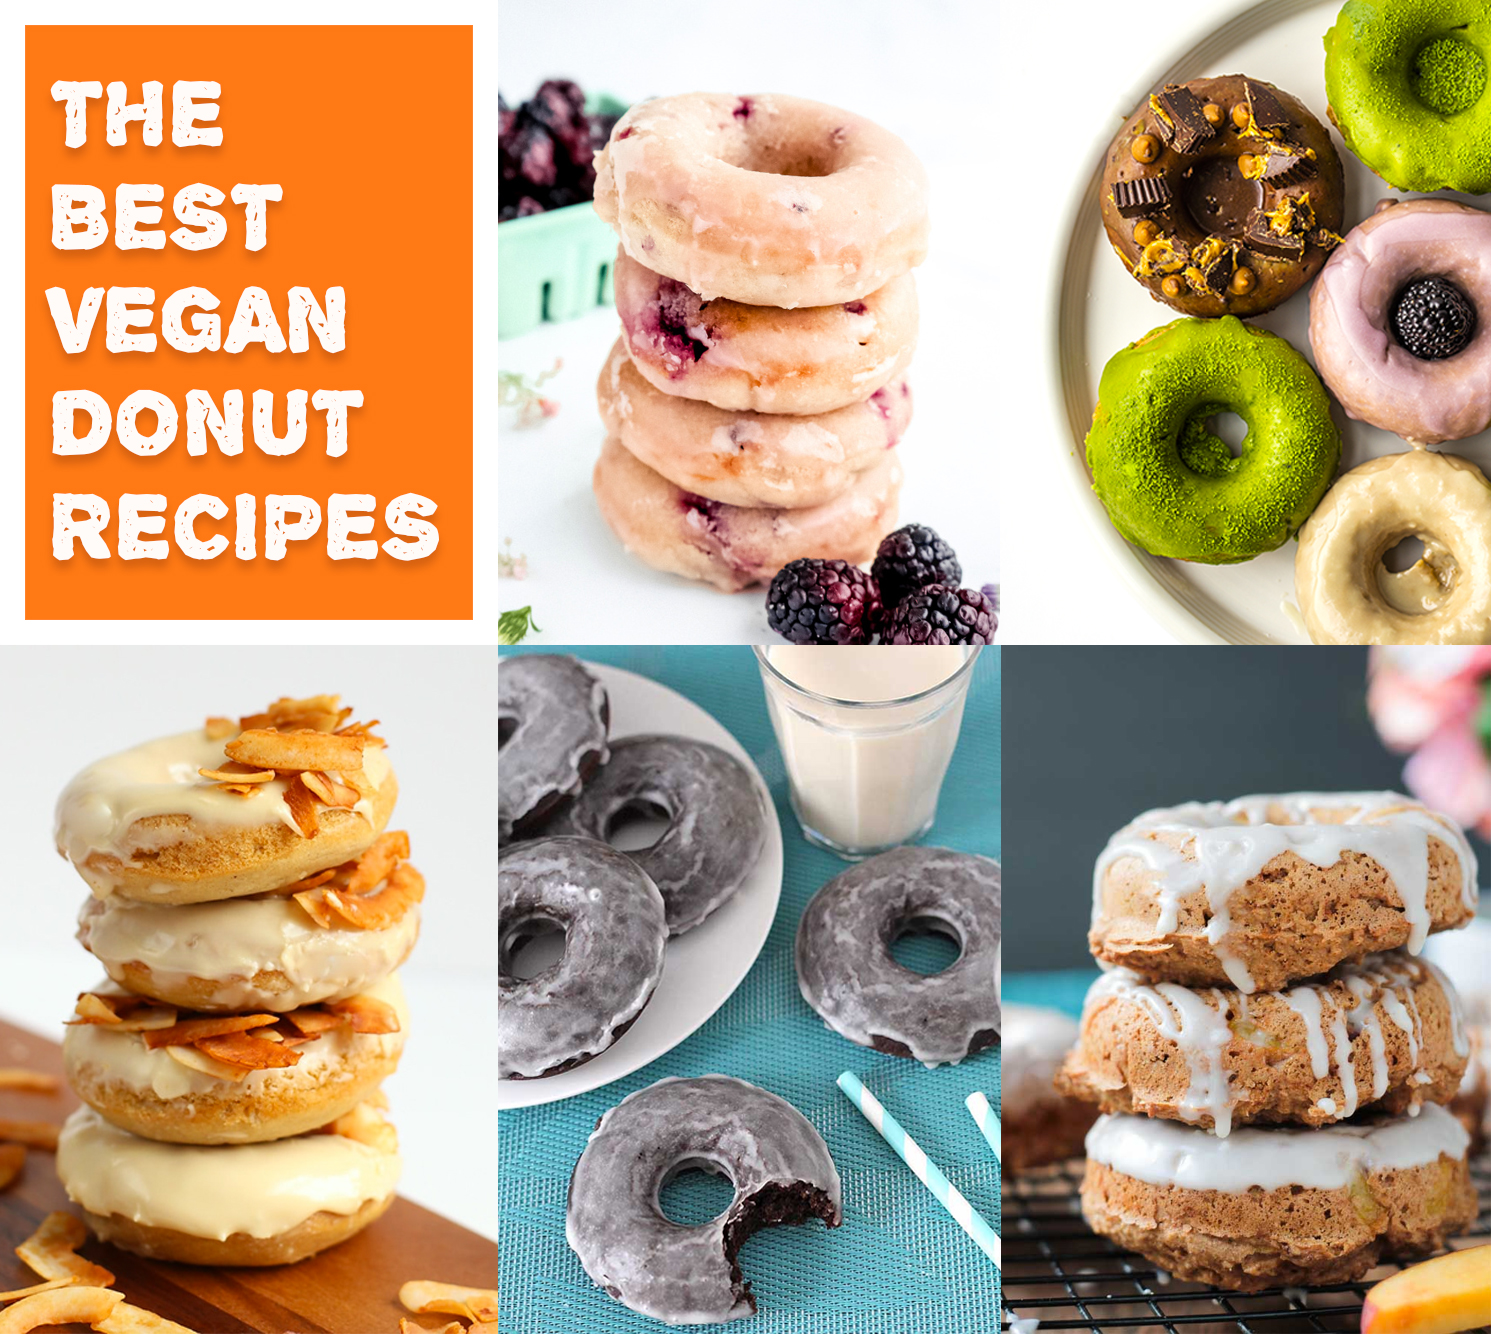 12 of the best vegan donuts recipes from some of my favorite food bloggers! This round-up has everything from citrus, glazed to chocolate donuts. #vegan #donuts #breakfast #recipes #dessert #veganrecipes #dairyfree #food 